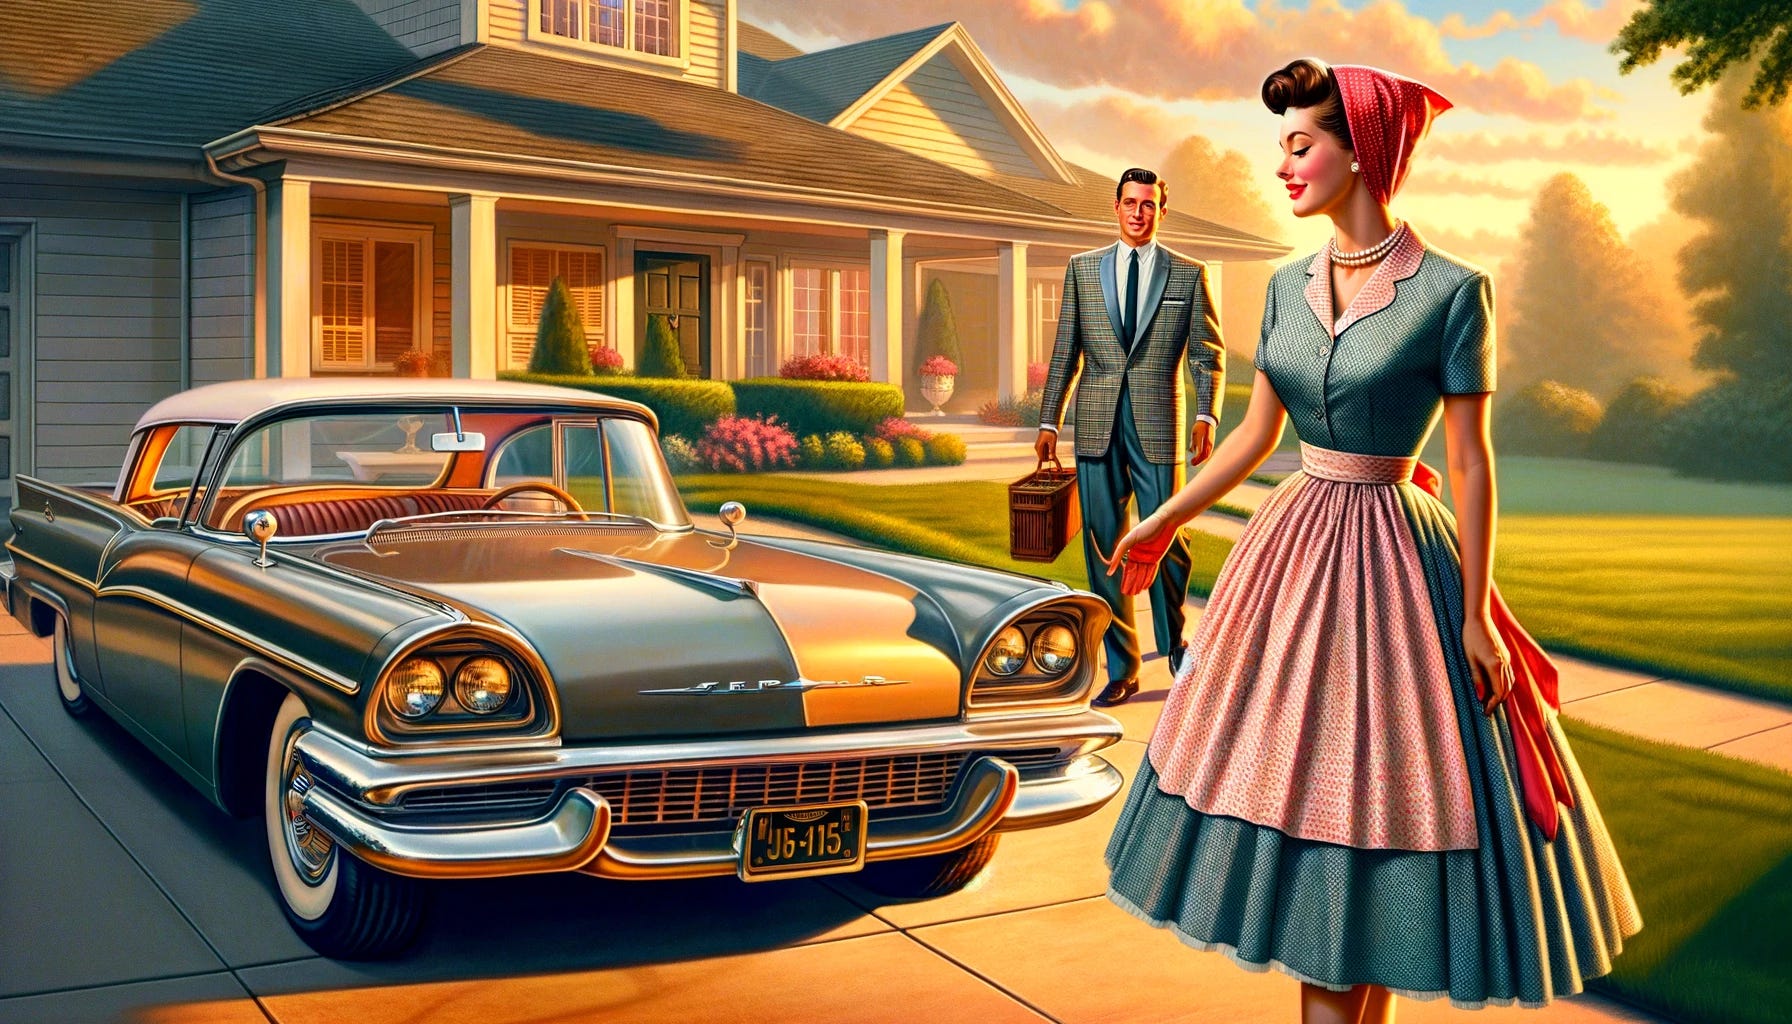 A vivid depiction of the 1950s, showcasing another angle of a Stepford housewife, elegantly attired in a period dress, complete with a stylish apron and gracefully styled hair, bidding farewell to her husband. This time, the husband is seen from a closer perspective, highlighting his dapper Mad Men-inspired suit as he prepares to enter a gleaming, vintage automobile, embodying the automotive design of the era. The setting is an immaculate suburban setting, with a well-kept house and a lush lawn in the background, reflecting the idealized American suburban life of the time. The scene is bathed in the warm, golden light of dawn, casting a picturesque and serene atmosphere, embodying the optimistic spirit of the post-war era.